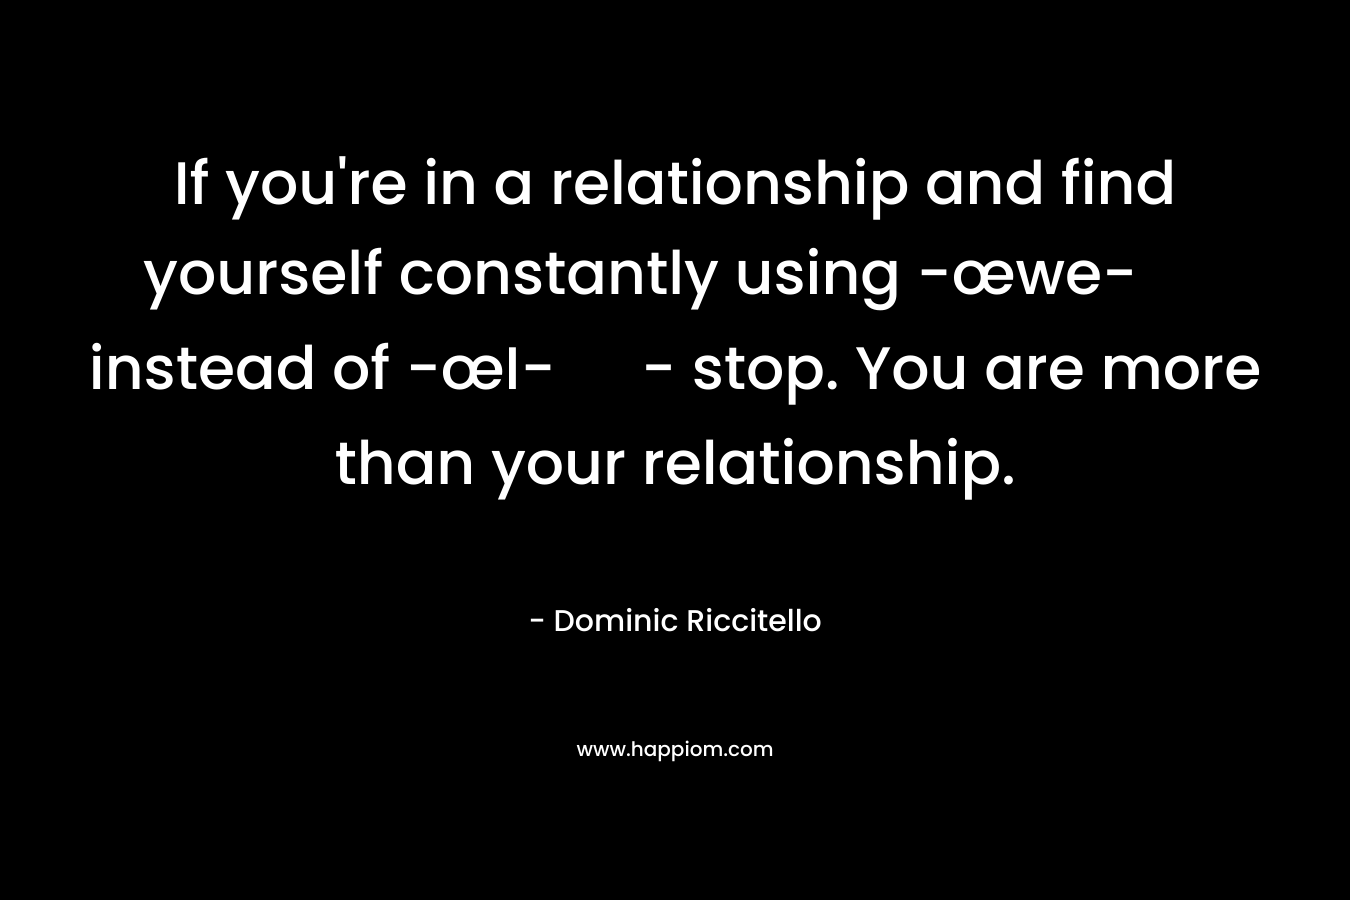 If you're in a relationship and find yourself constantly using -œwe- instead of -œI- - stop. You are more than your relationship.